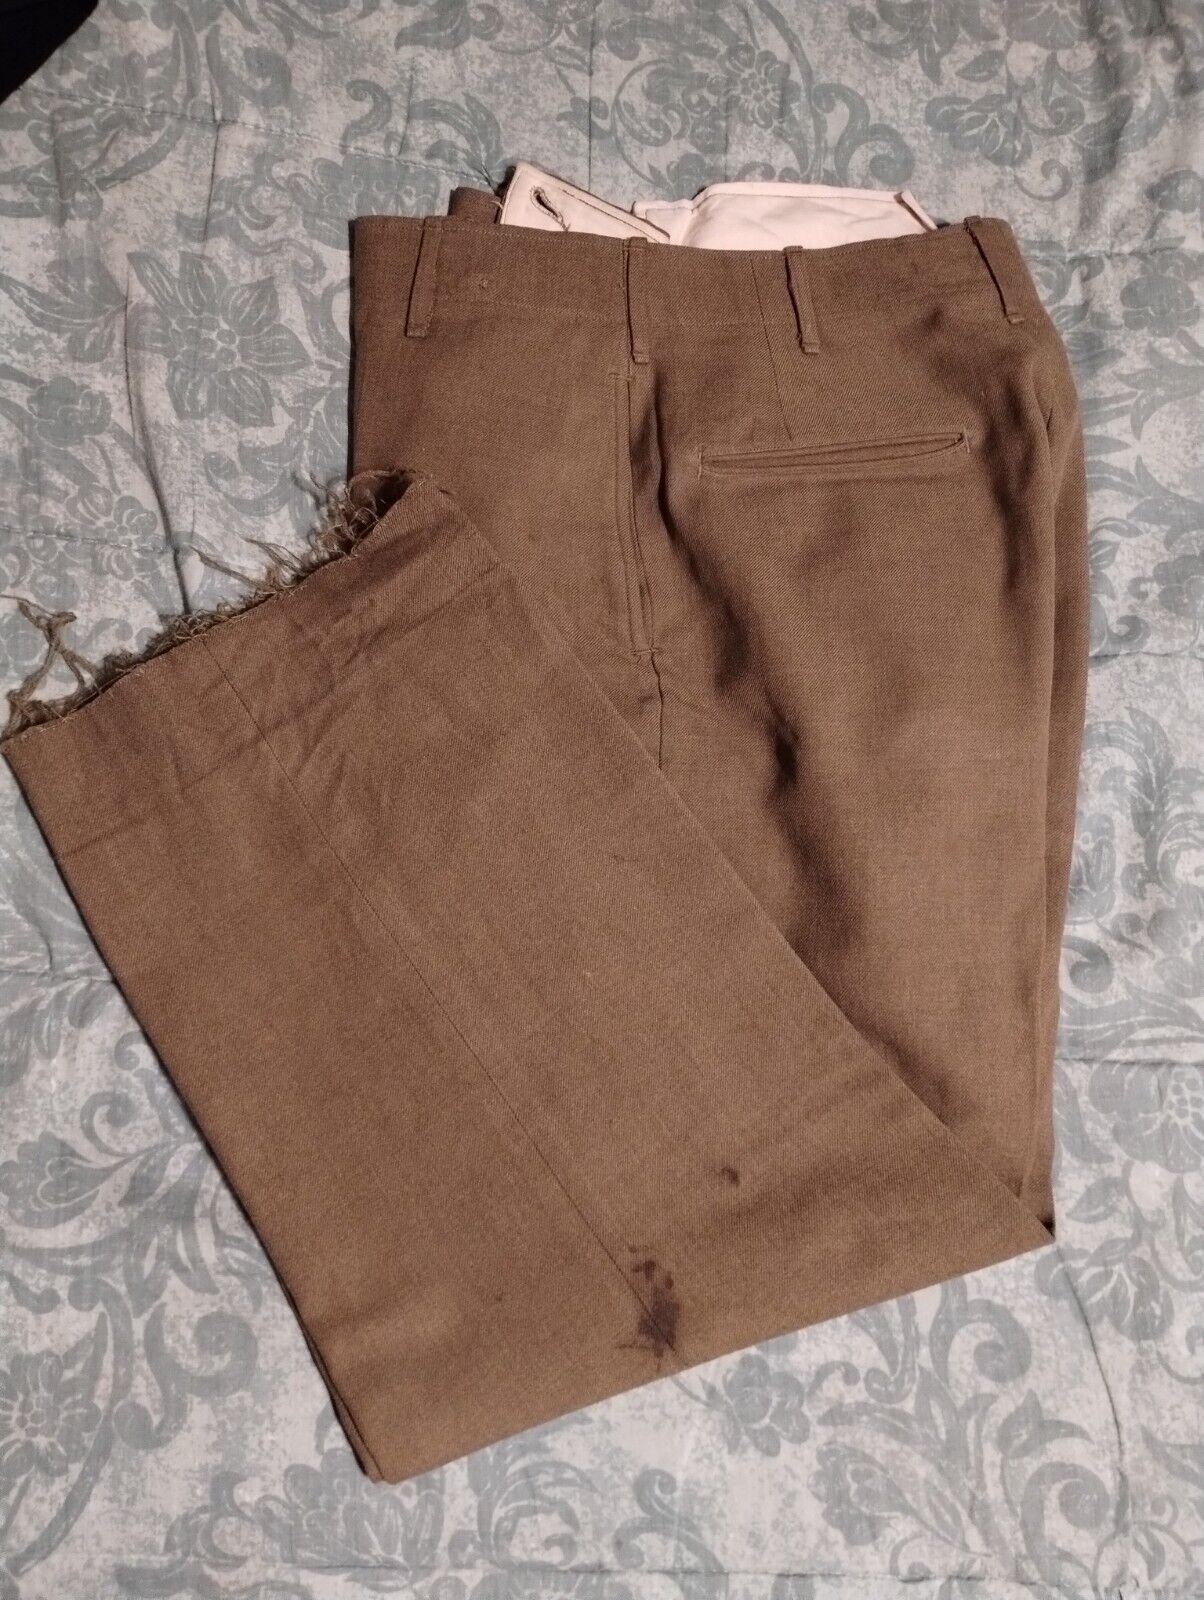 WW2 Vintage US Army Wool Uniform Trousers Pants, Approximately 29 X 24.5